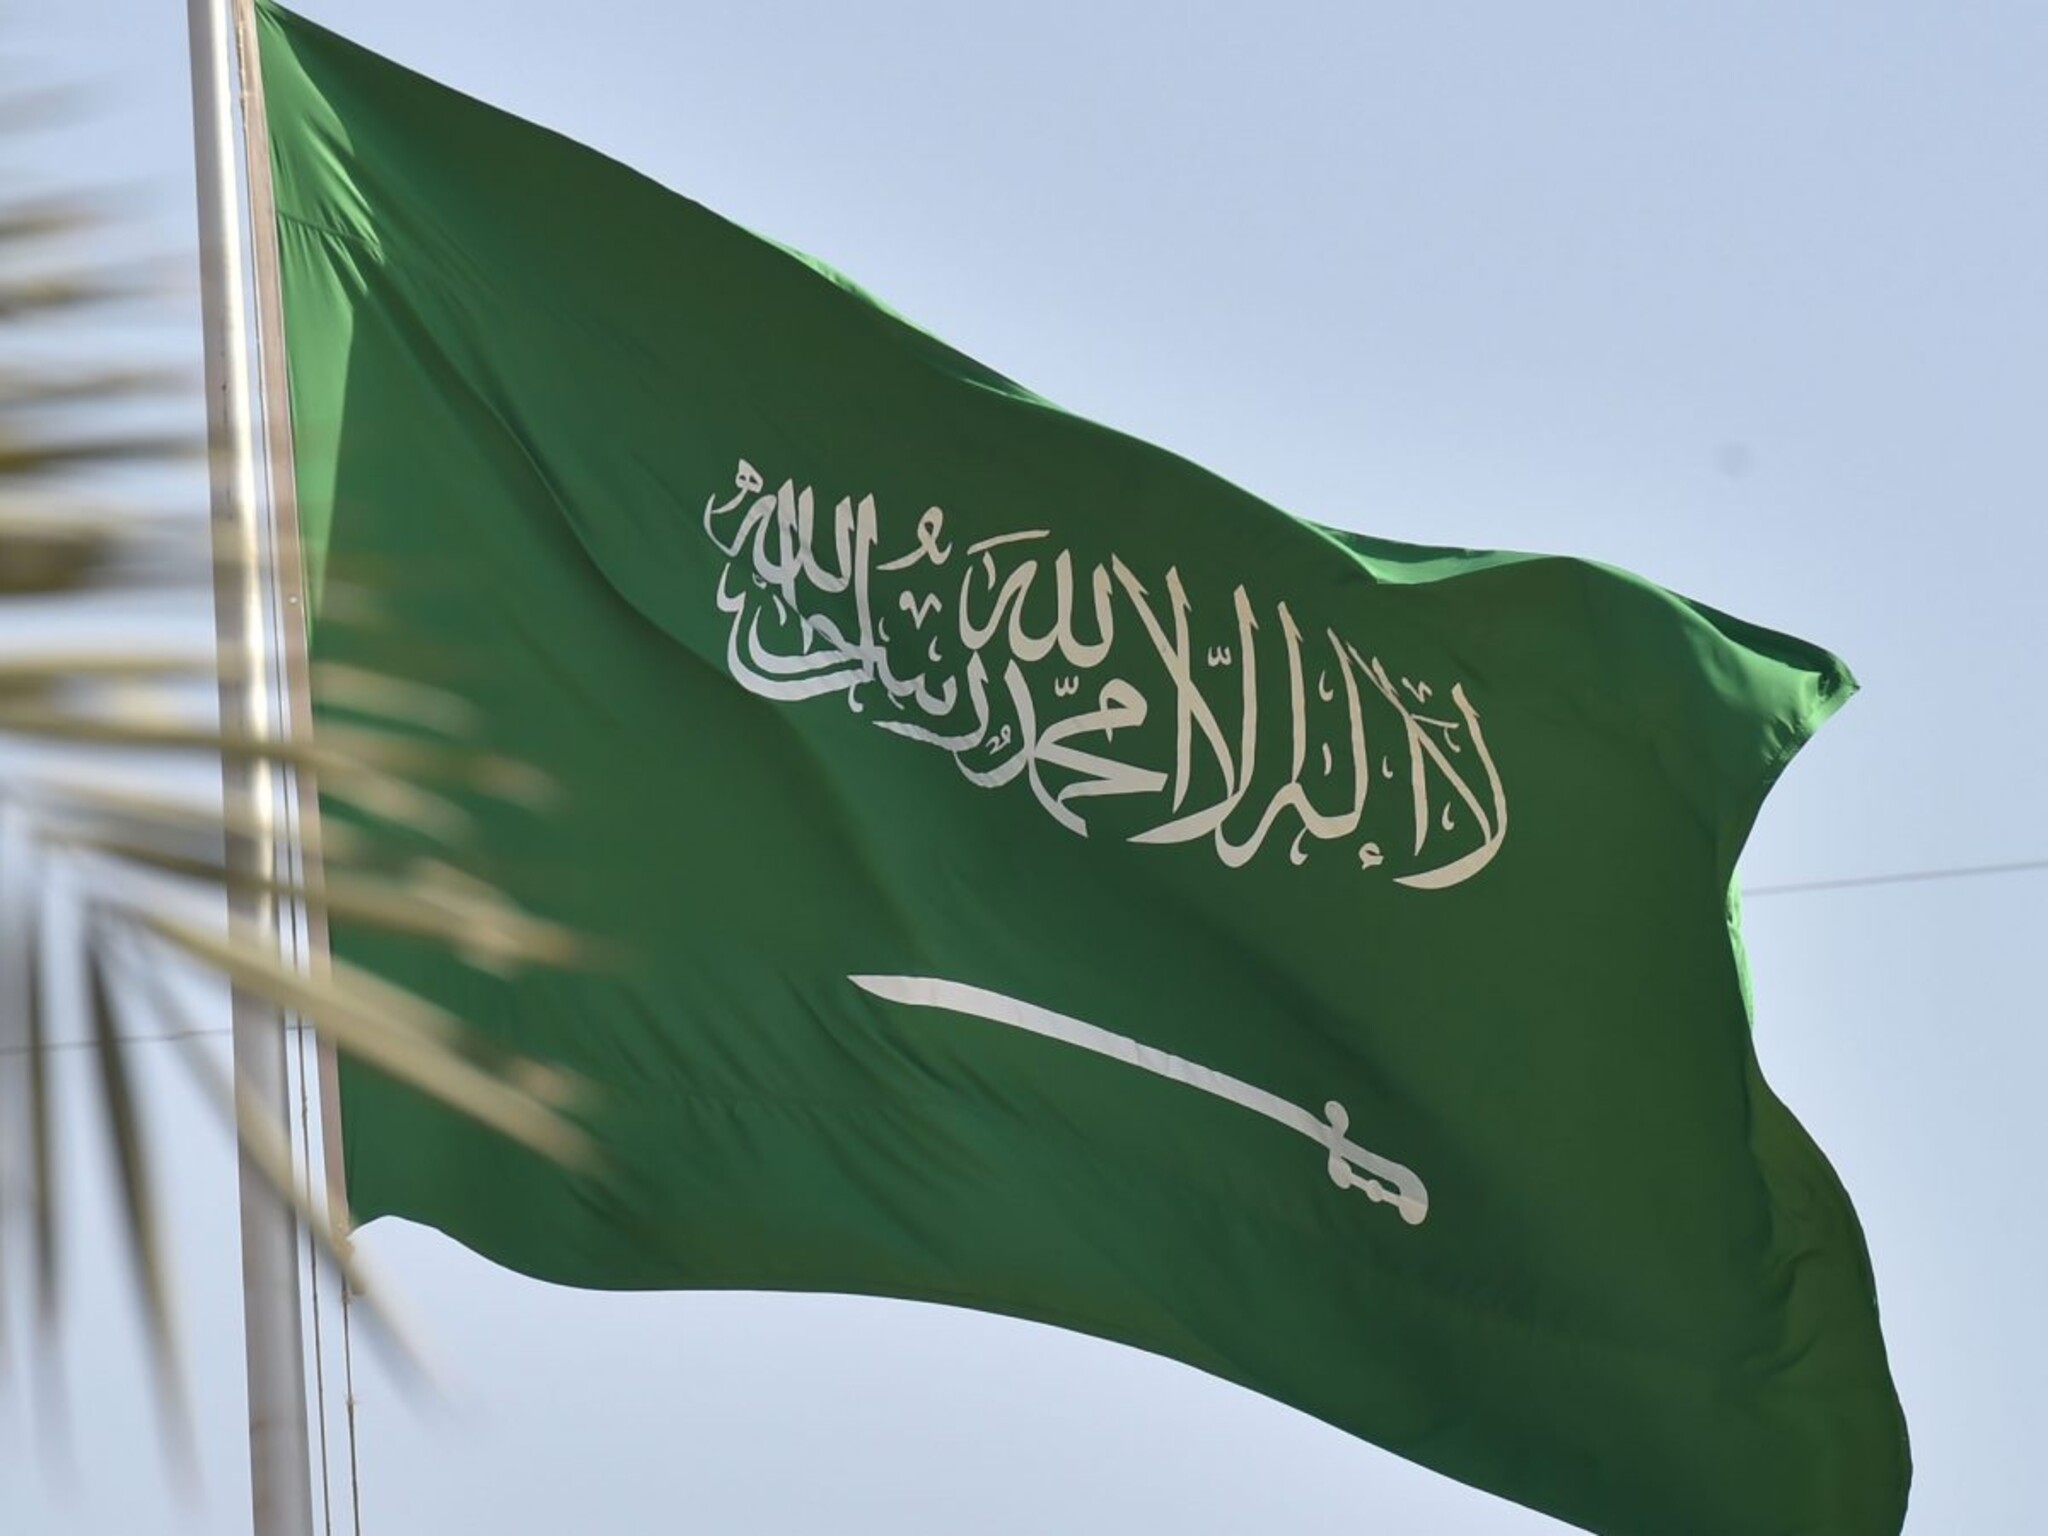 Social Security in Saudi Arabia, providing beneficiaries with a range of assistance programs